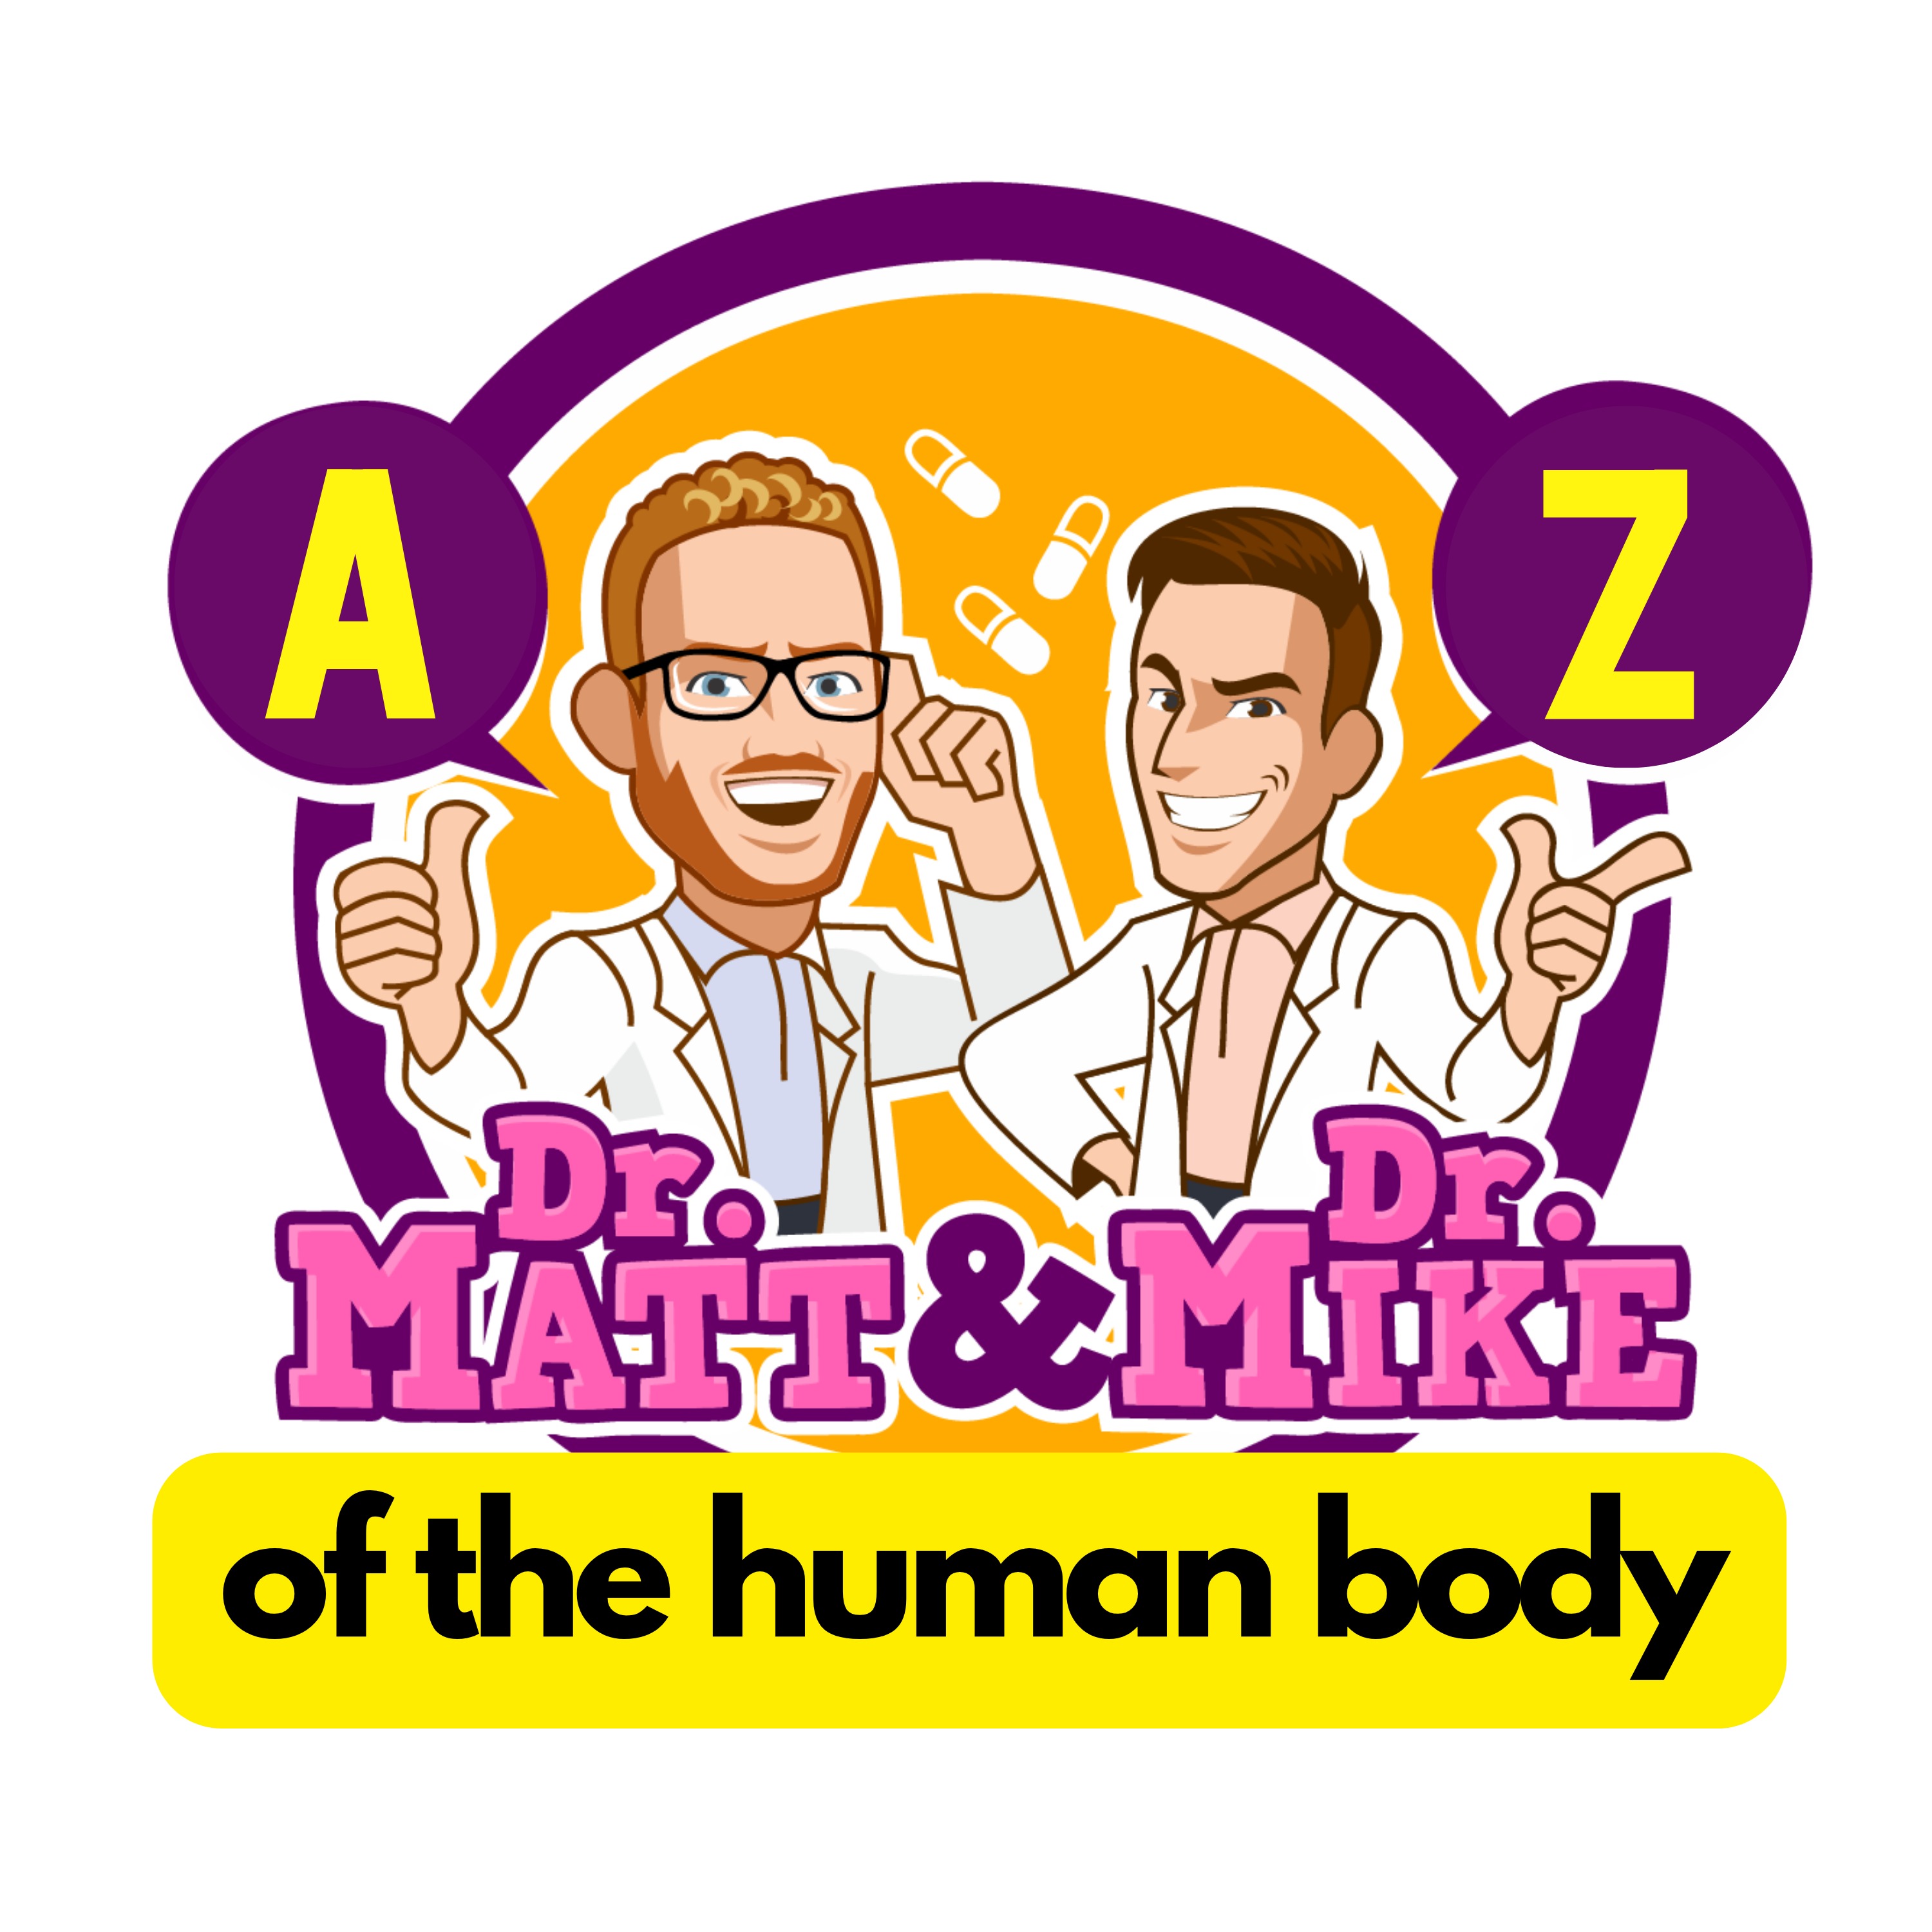 Angiotensin 1 and 2 | A-Z of the Human Body